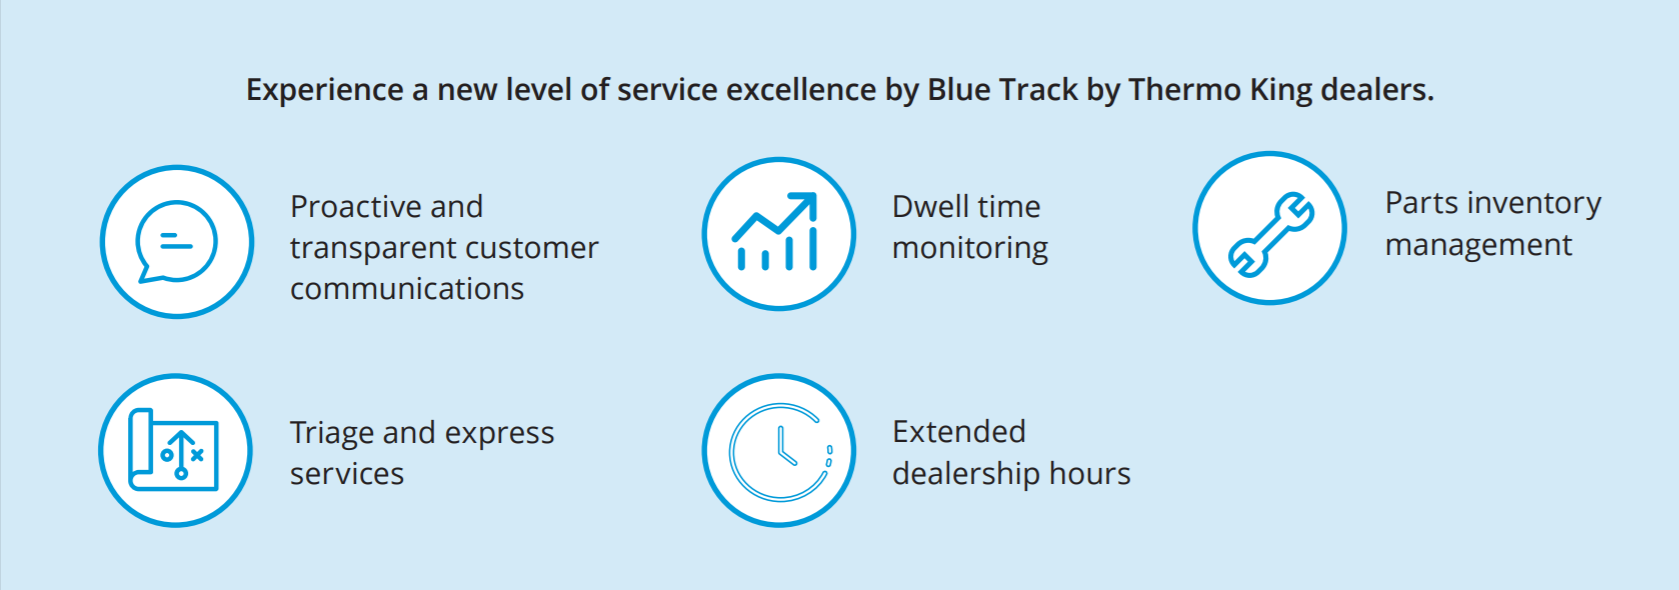 Experience a new level of service excellence by Blue Track by Thermo King dealers